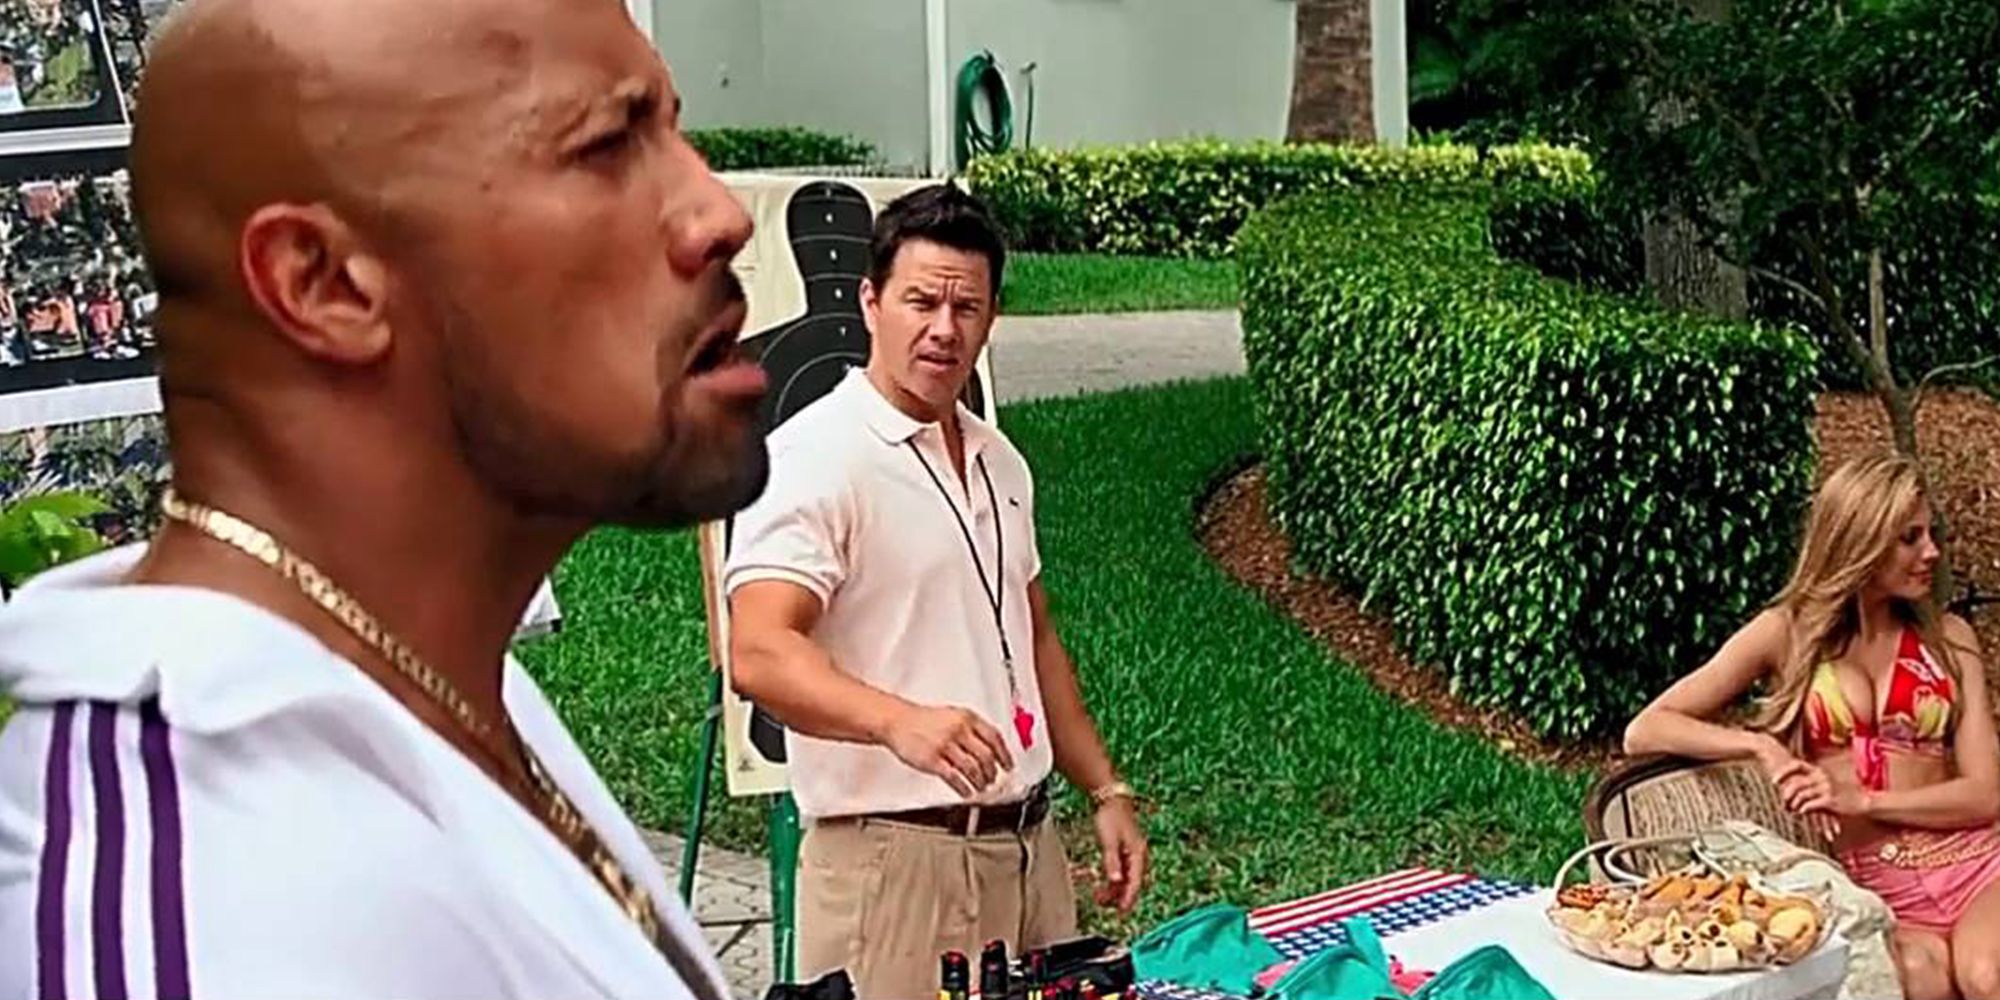 pain and gain scene from neighborhood watch with mark wahlberg and dwayne johnson